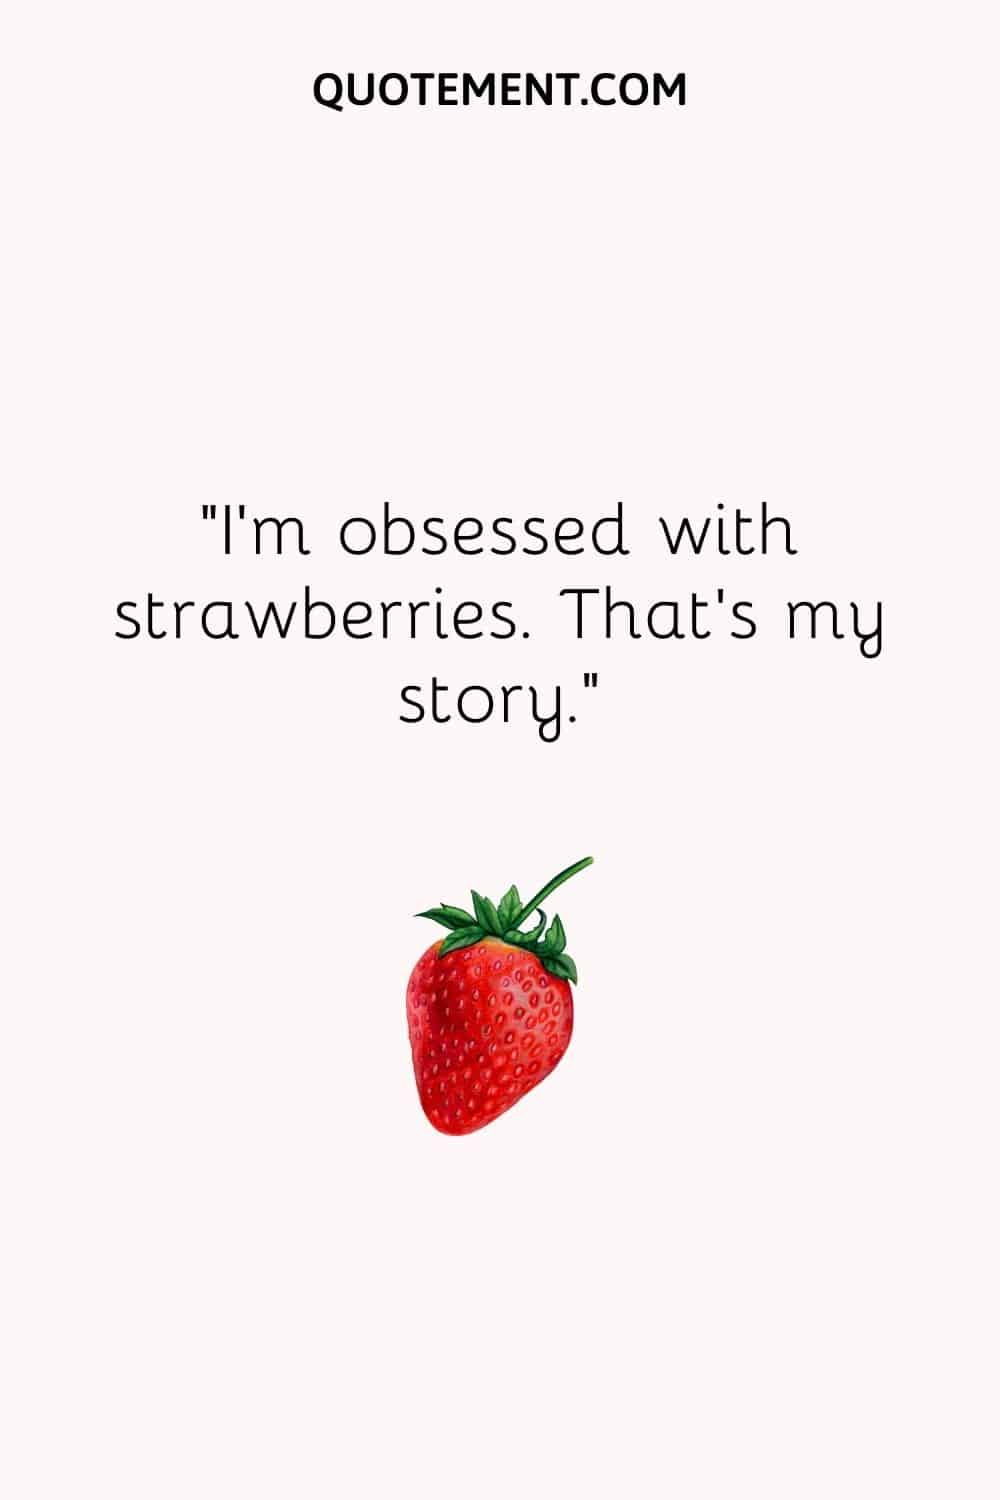 I’m obsessed with strawberries. That’s my story